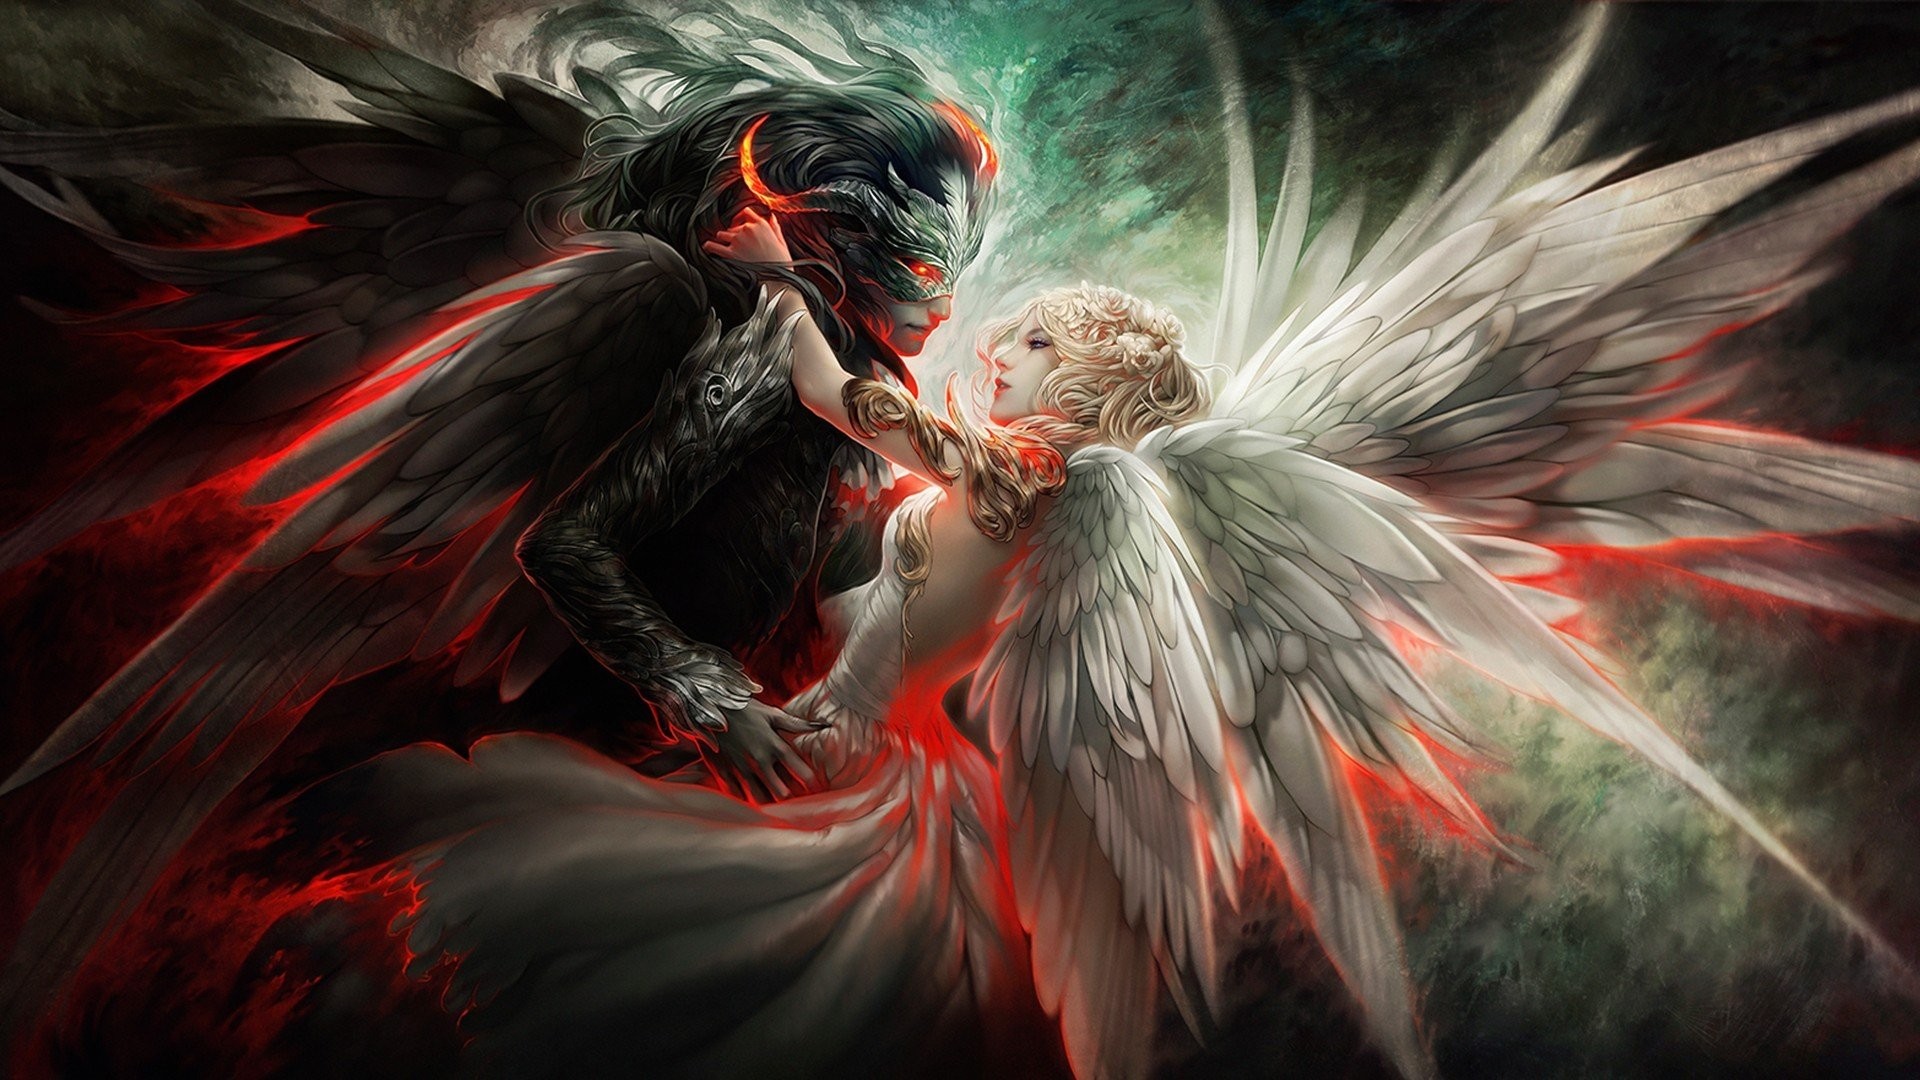 Collection of Angel Devil Wallpaper on HDWallpapers 19201080